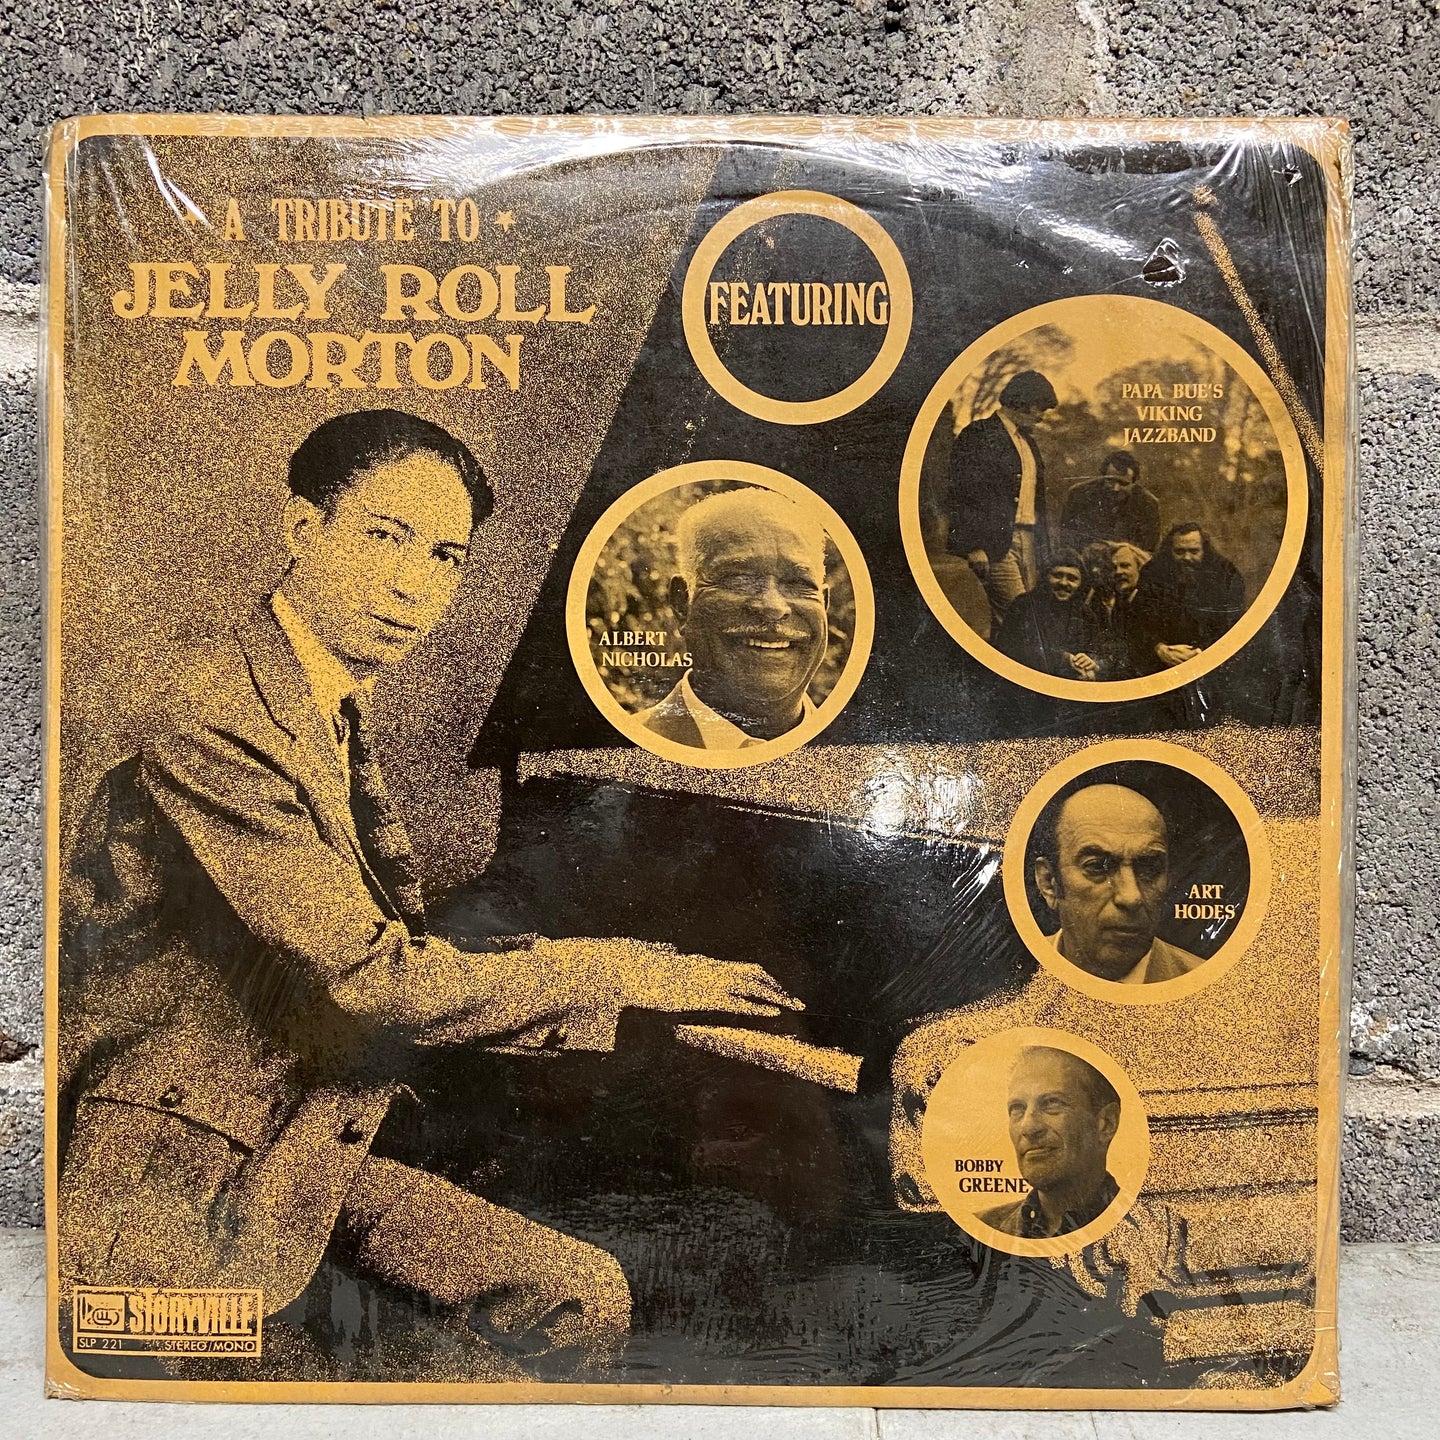 A Tribute To Jelly Roll Morton